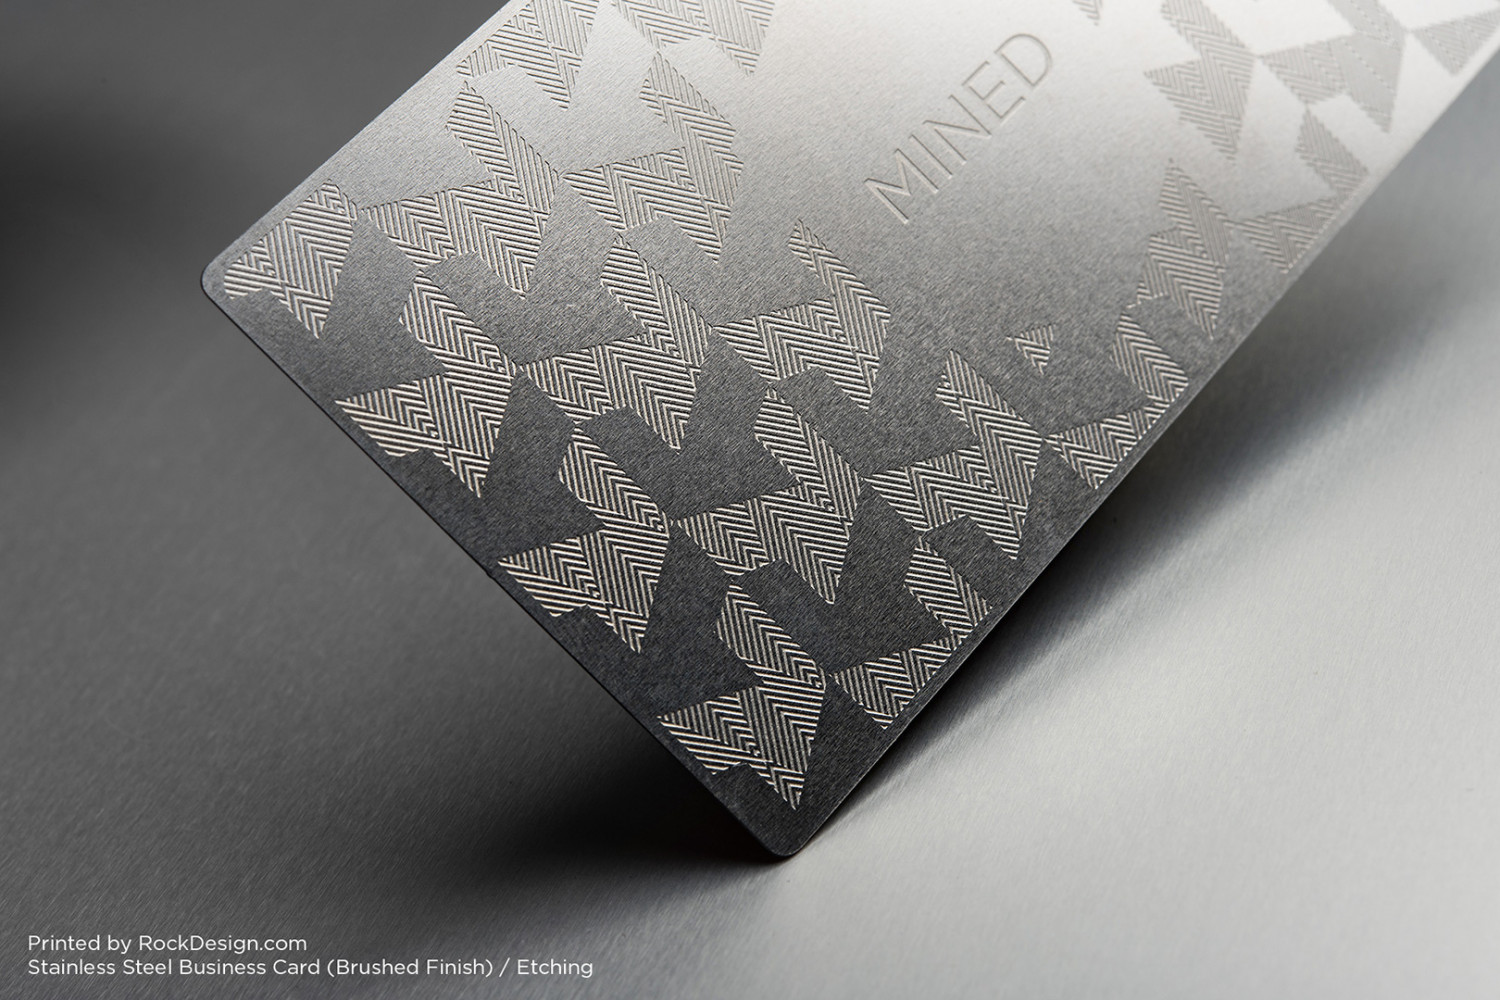 Print etched metal business cards ONLINE TODAY 